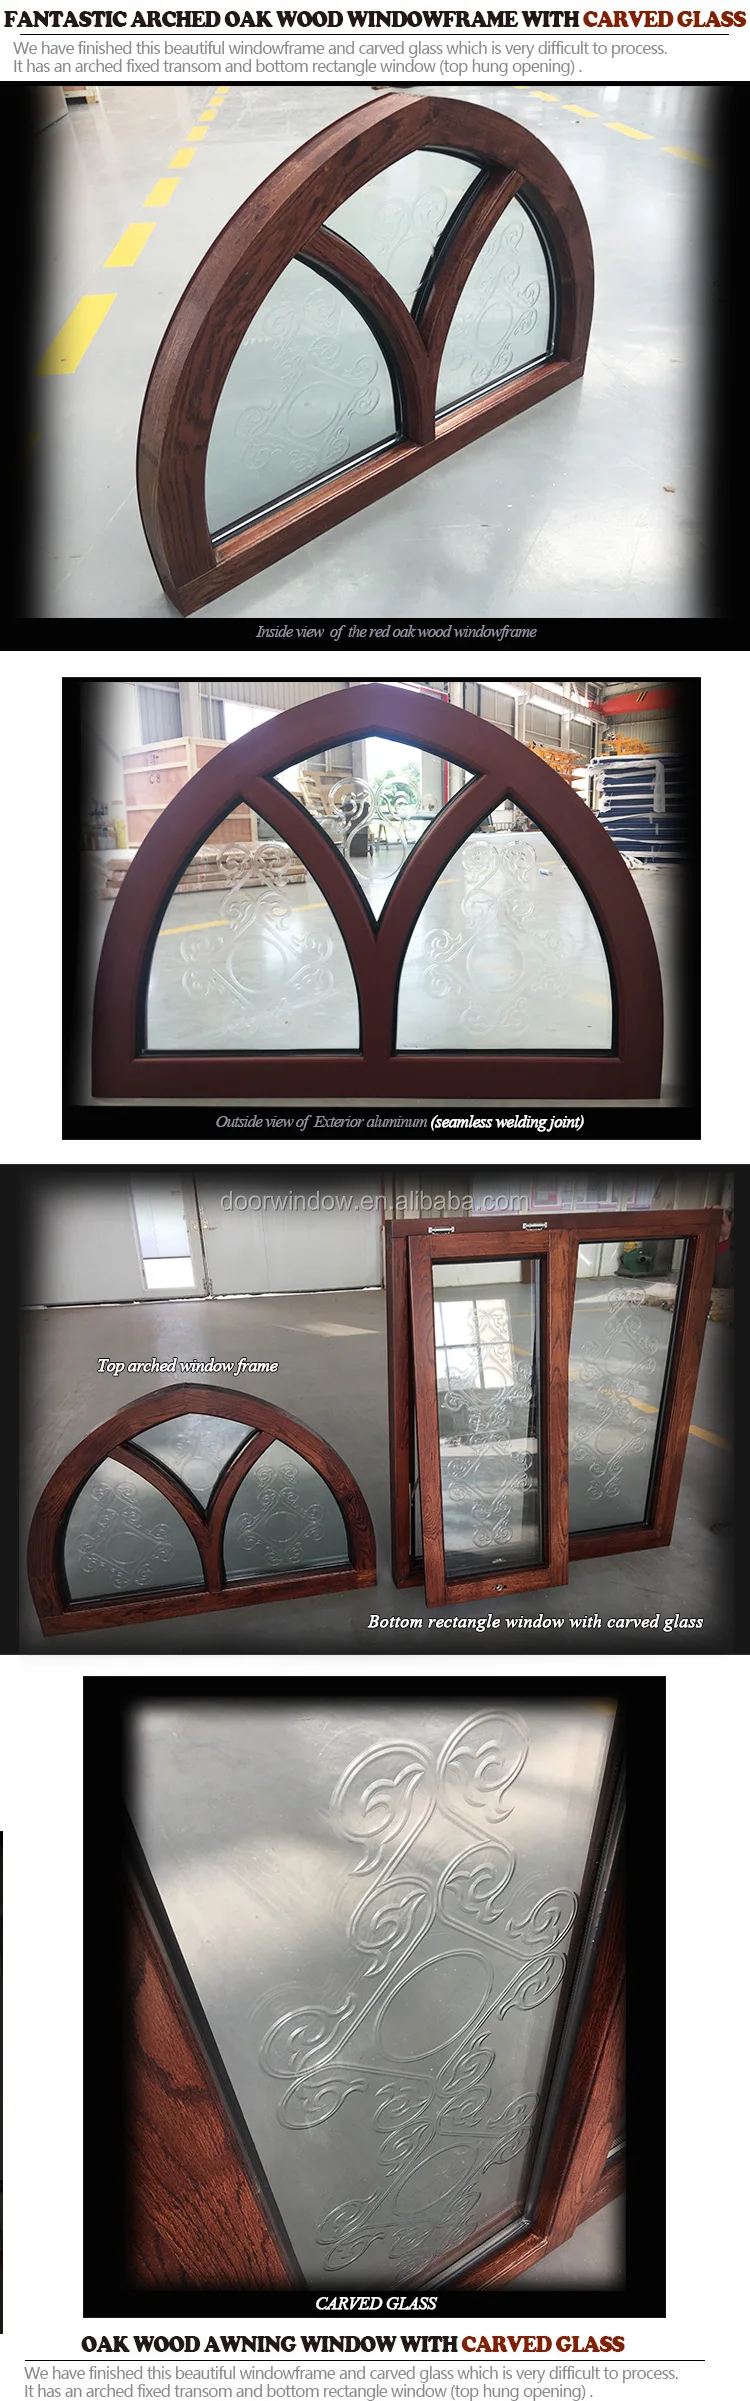 Fantastic arched oak wood window frame with carved glass for house